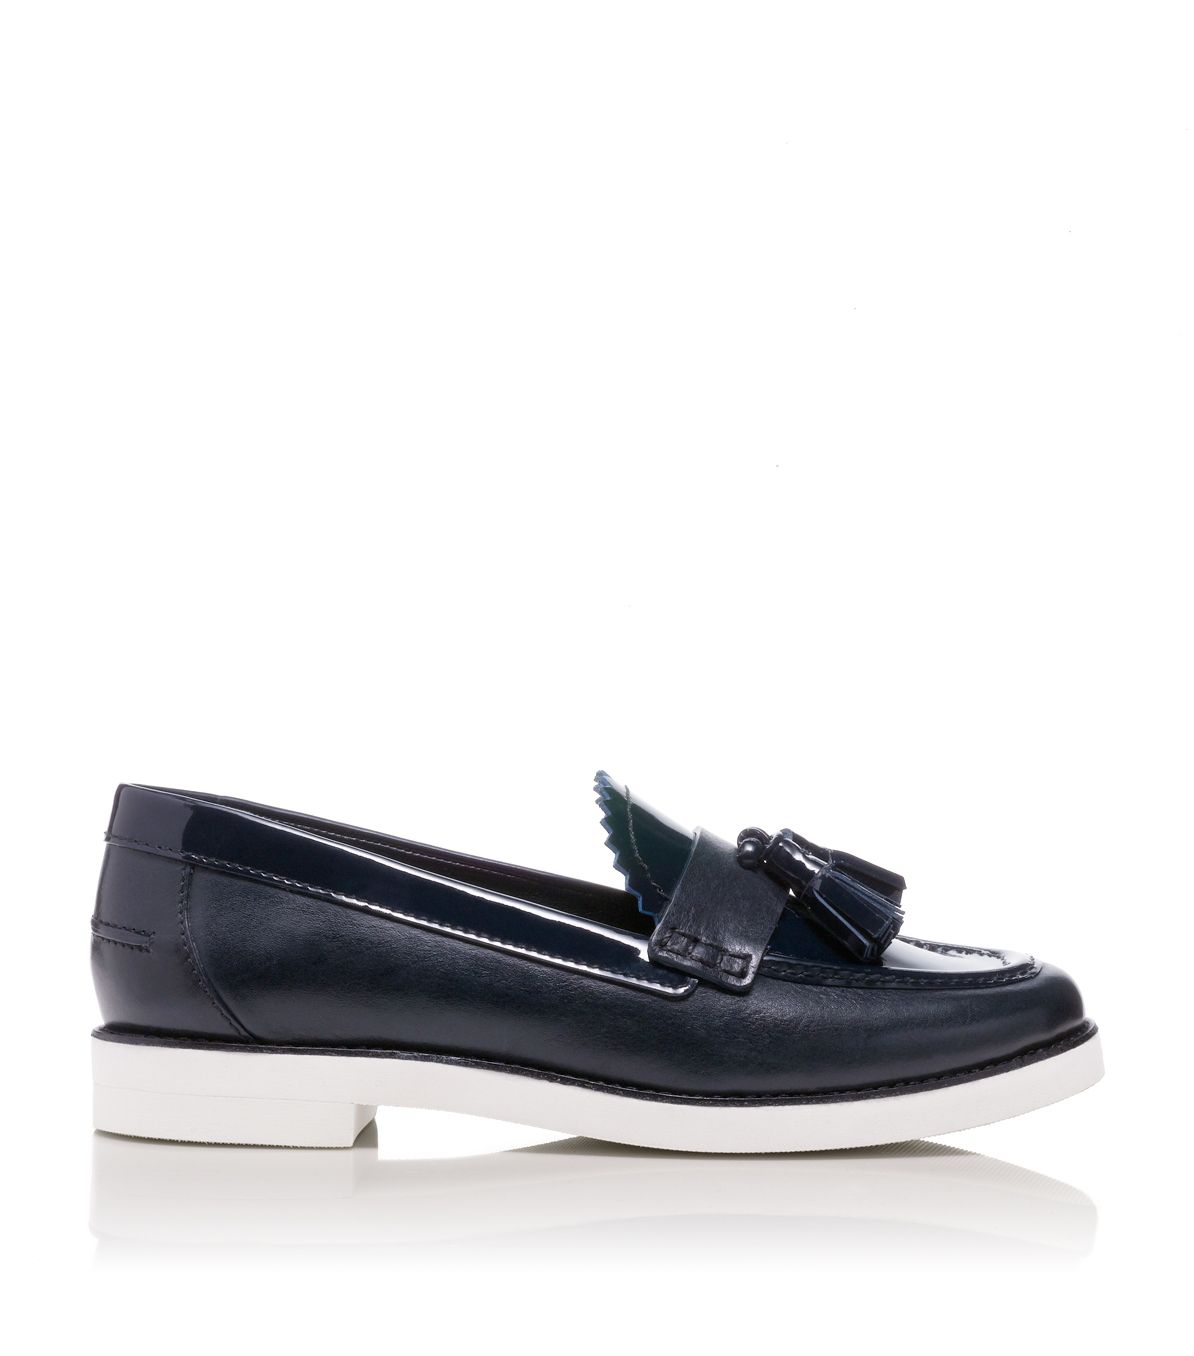 Lyst - Tory Burch Careen Loafer in Blue